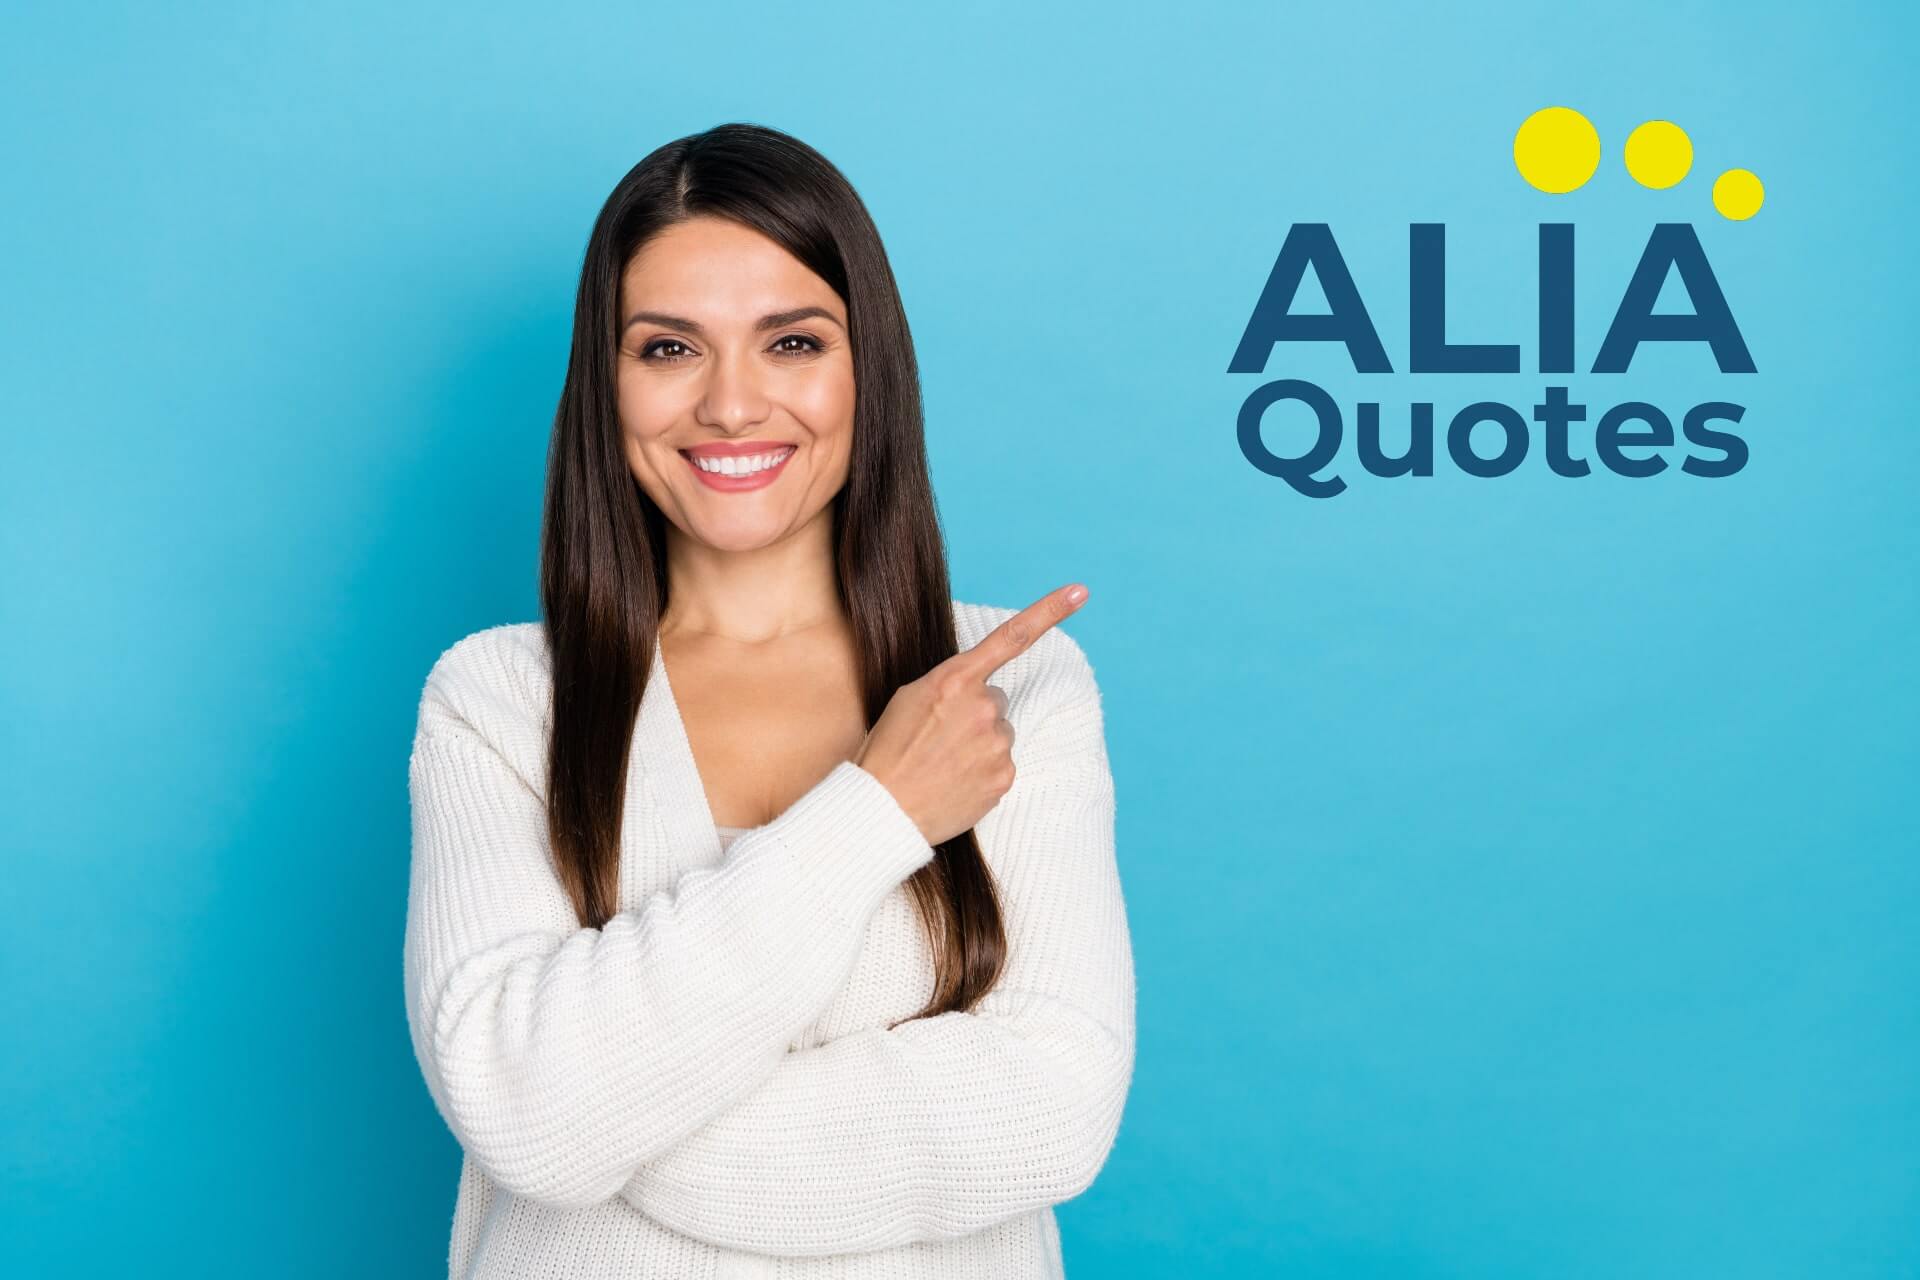 Woman pointing at the ALIA Quotes logo